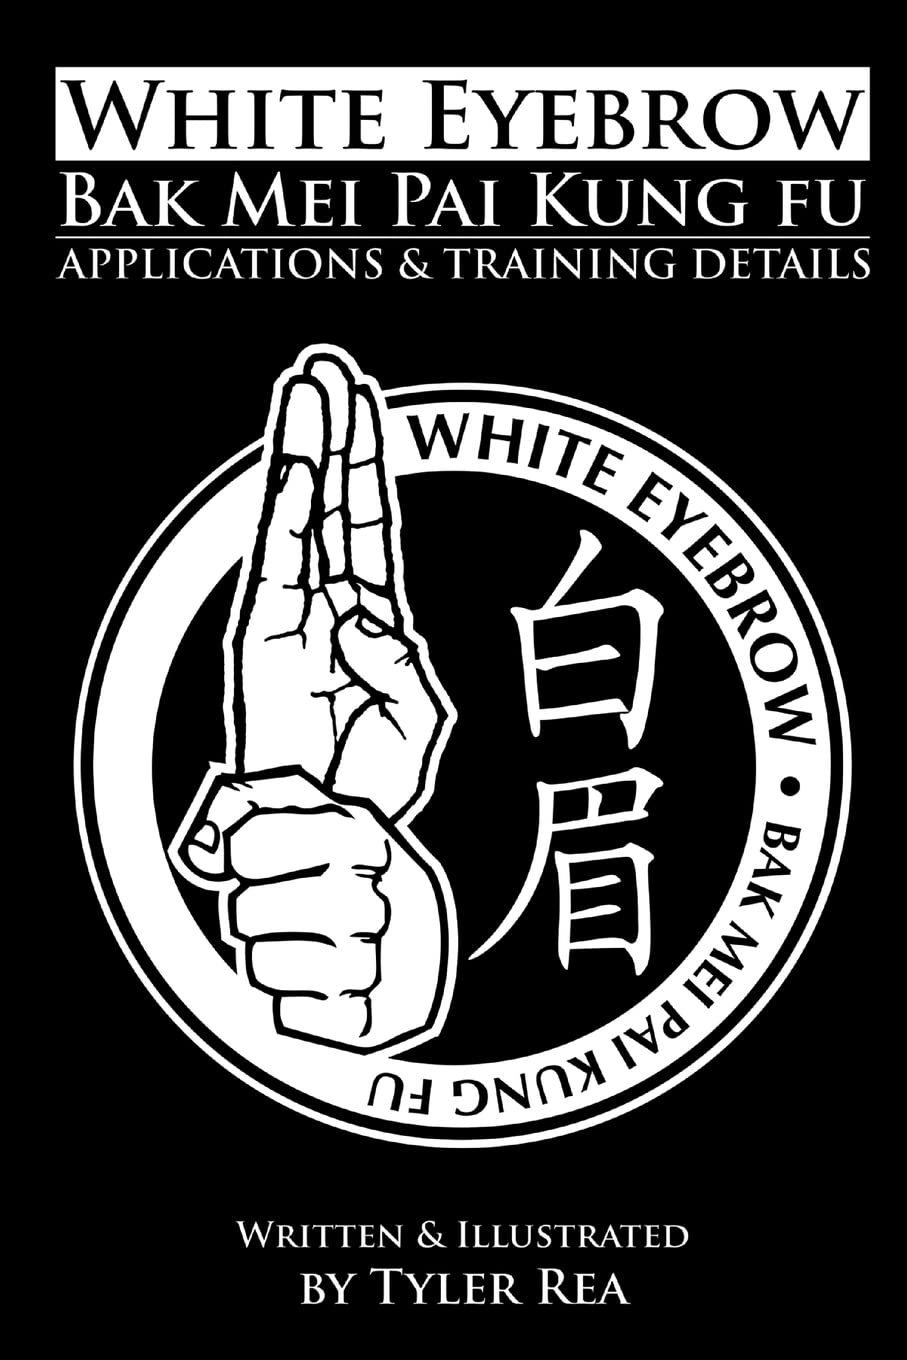 White Eyebrow Bak Mei pai kung fu Applications and Training Details Book by Tyler Rea